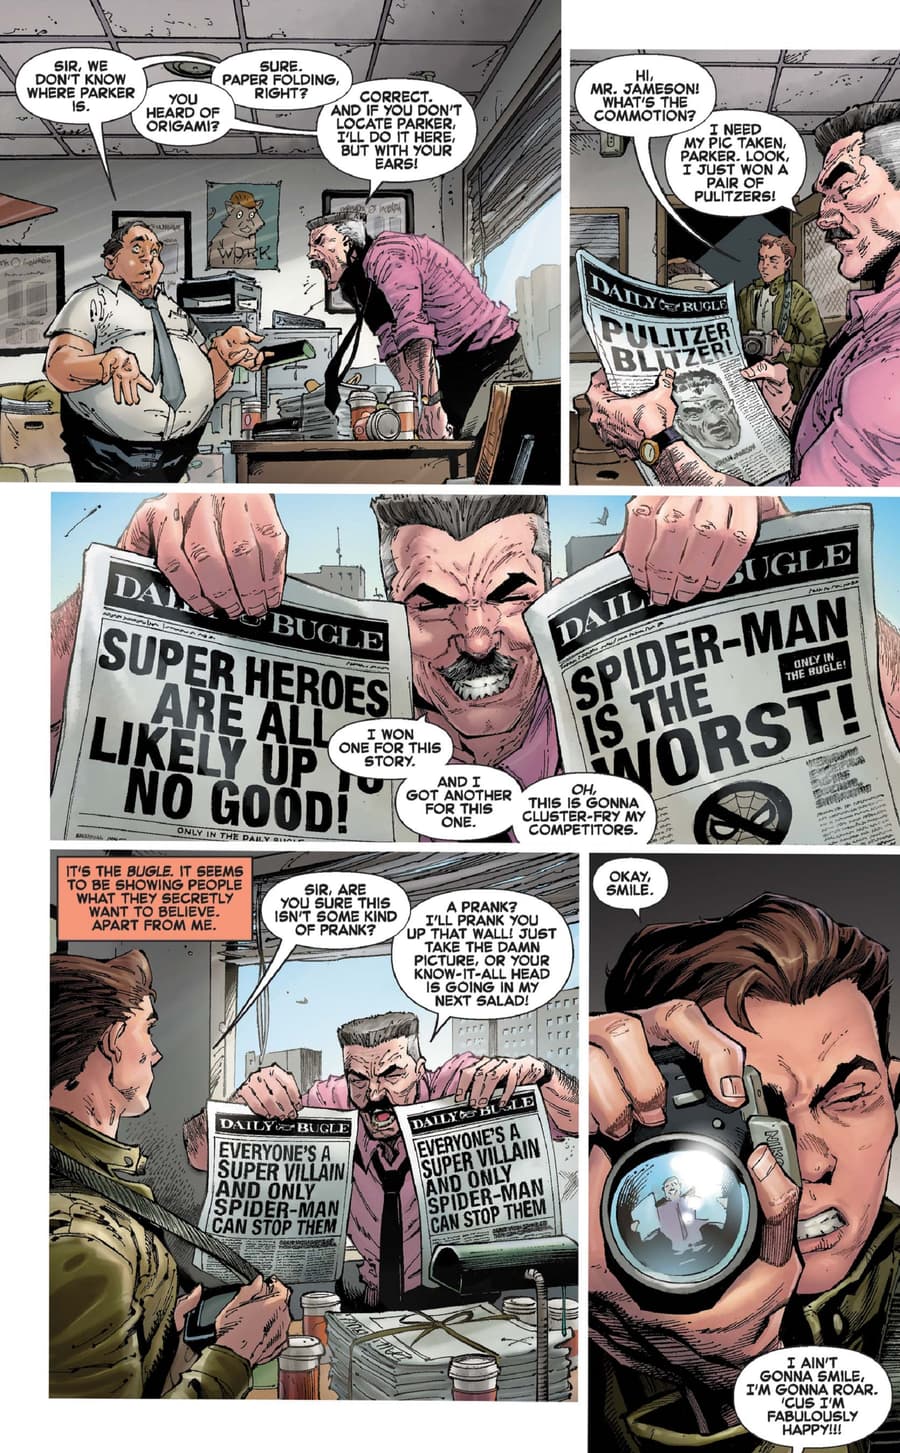 A preview of “Spider-Man vs. Conspiriton” from AMAZING FANTASY (2022) #1000. Art by Ryan Stegman, JP Mayer, and Sonia Oback.